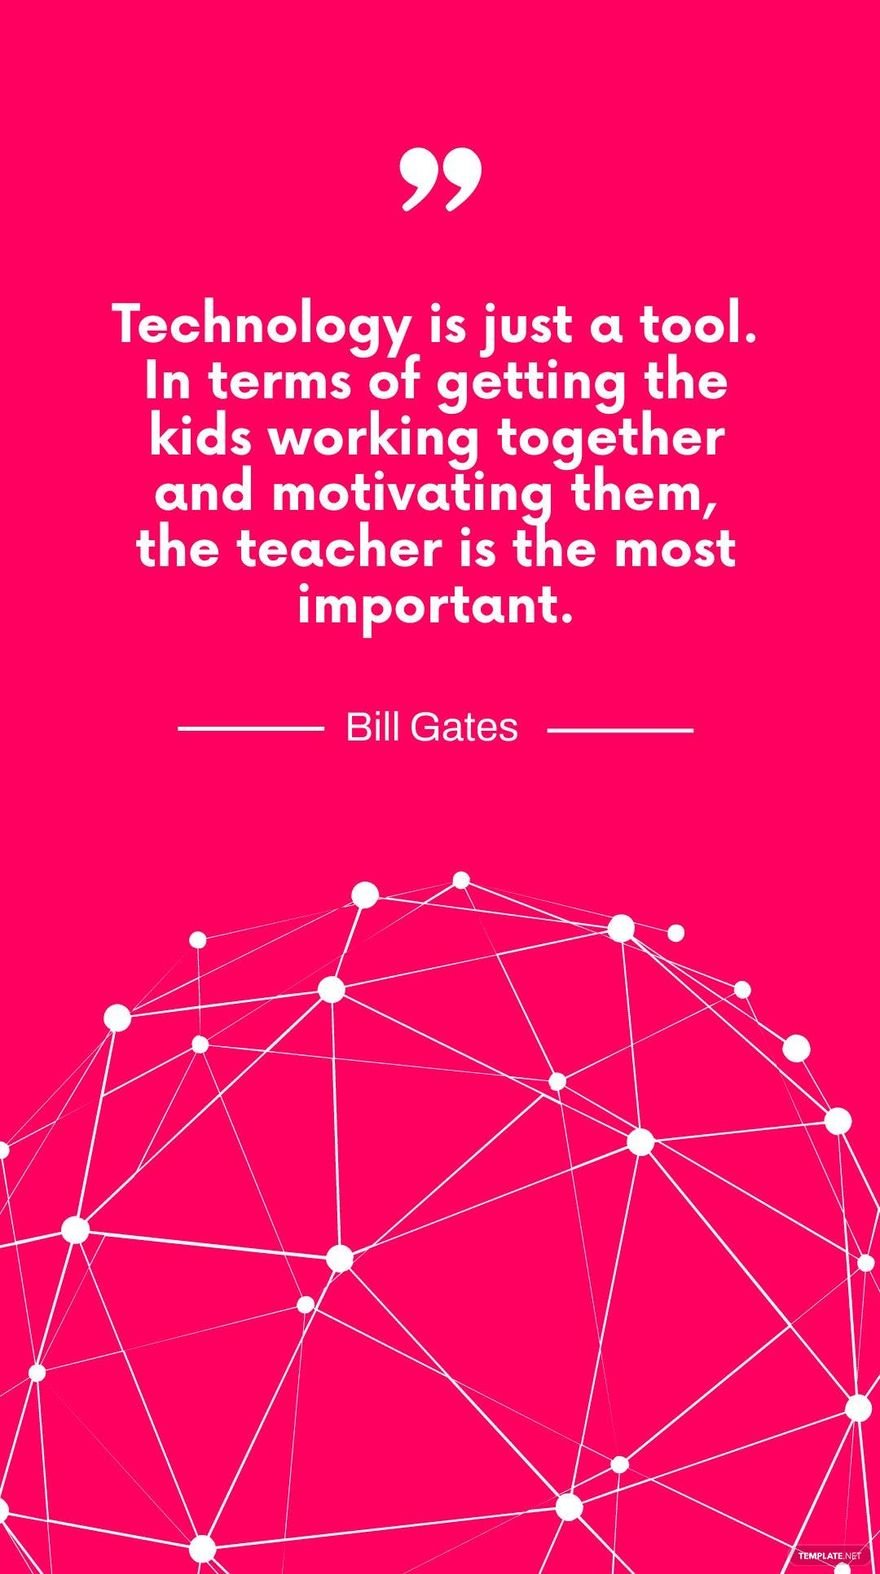 Bill Gates - Technology is just a tool. In terms of getting the kids working together and motivating them, the teacher is the most important.